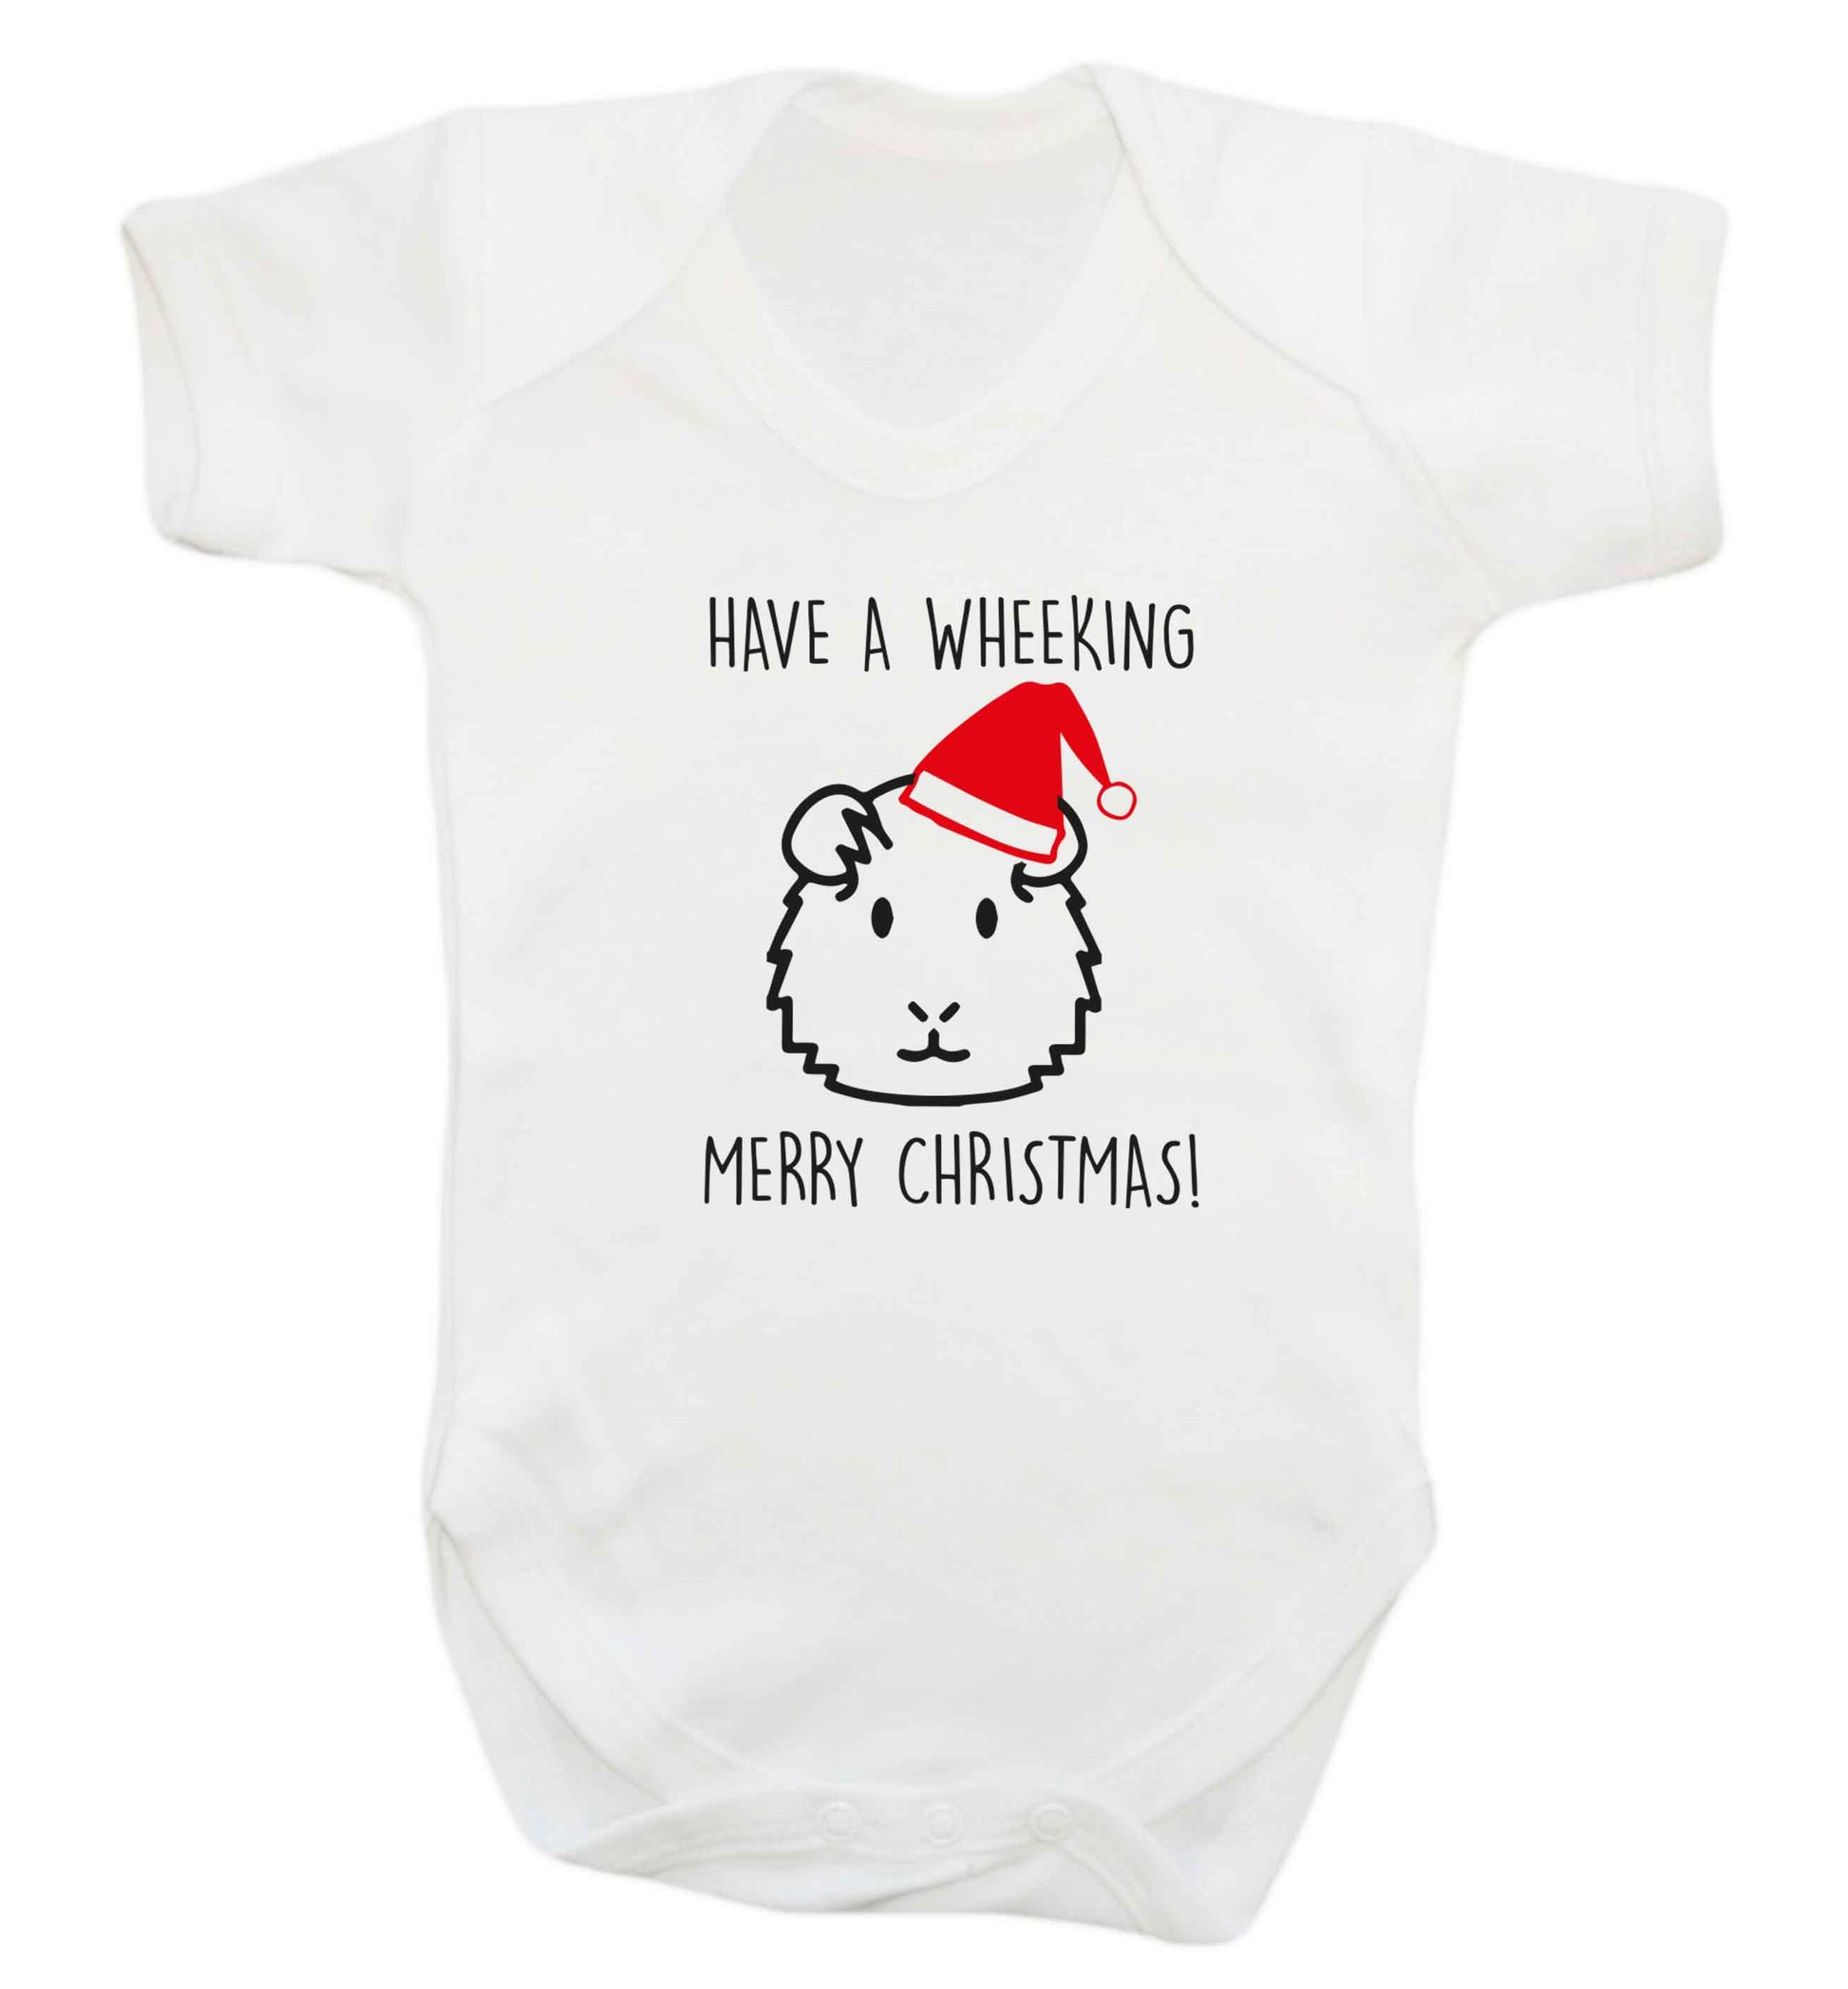 Have a wheeking merry Christmas baby vest white 18-24 months